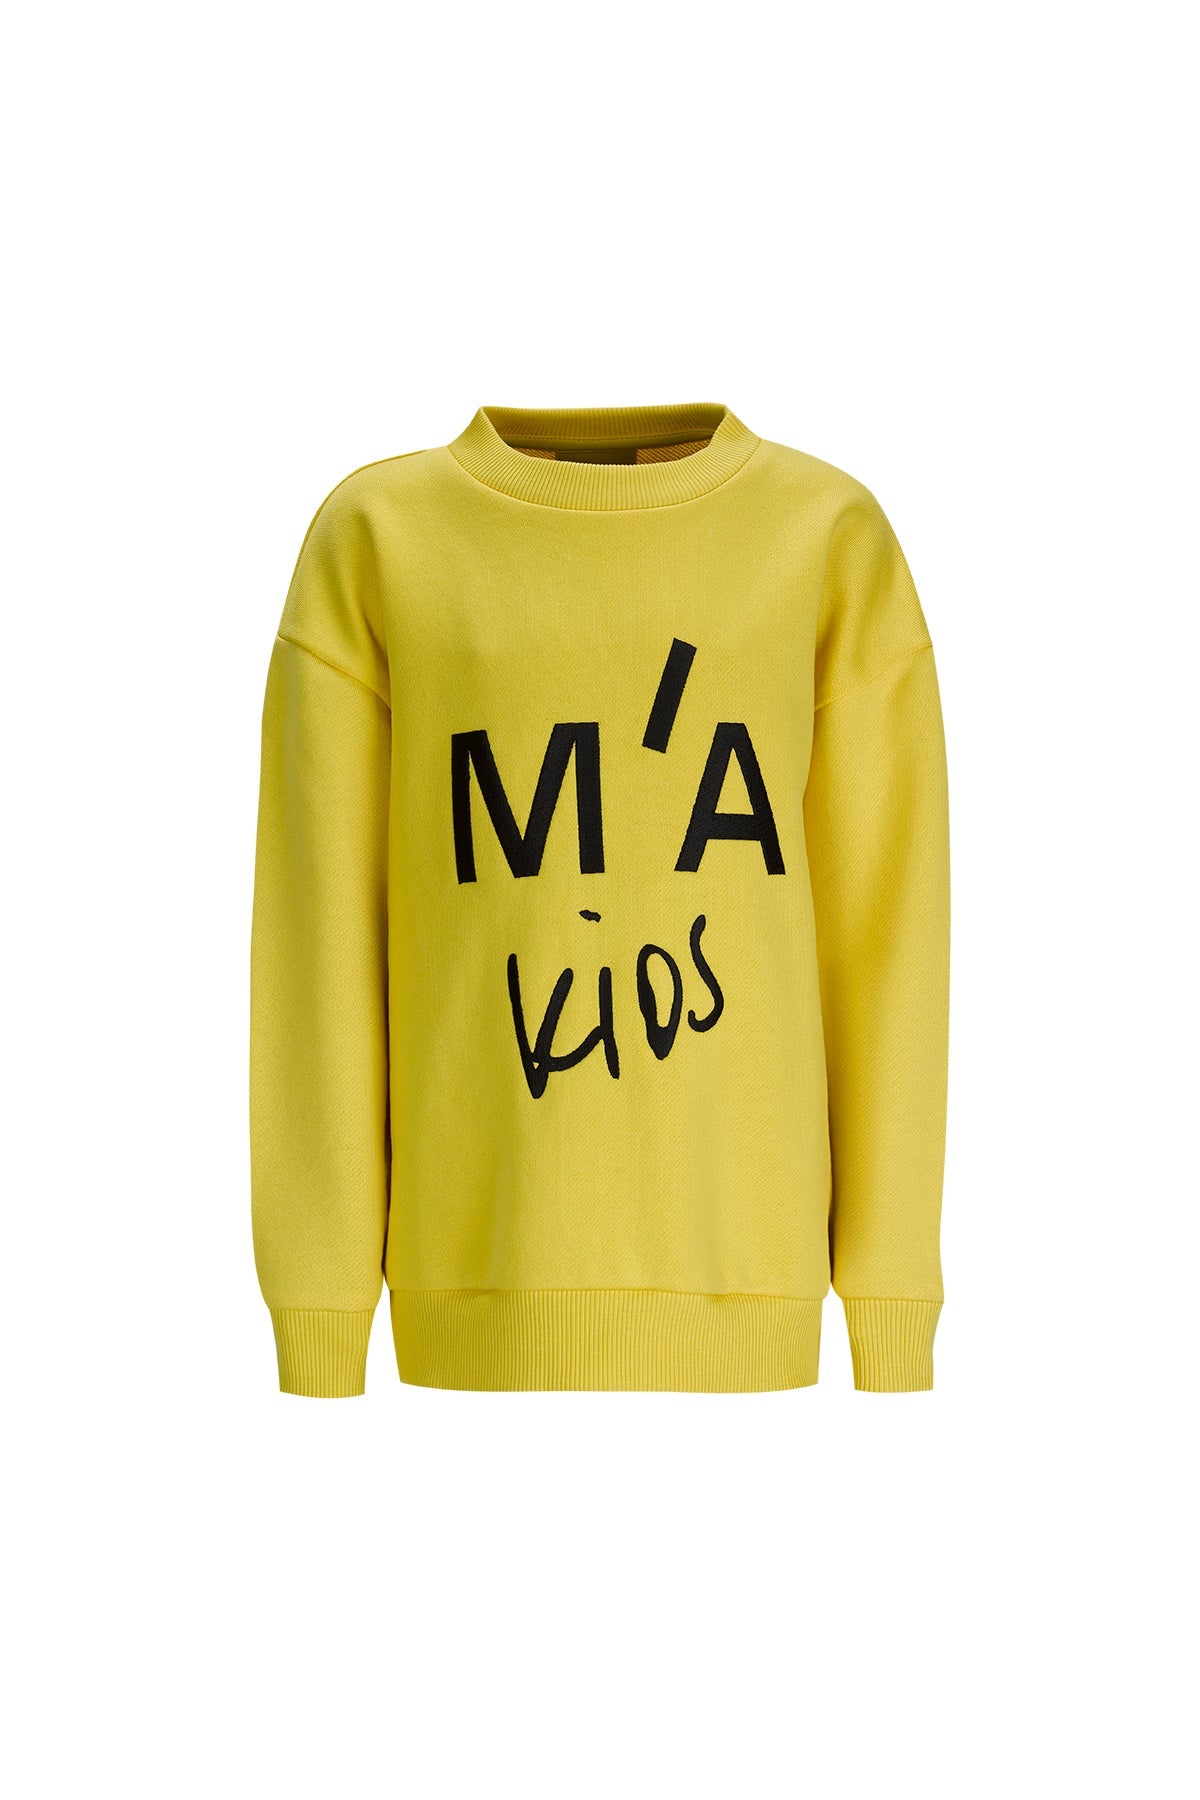 EMBROIDERED CREW NECK IN YELLOW ma kids